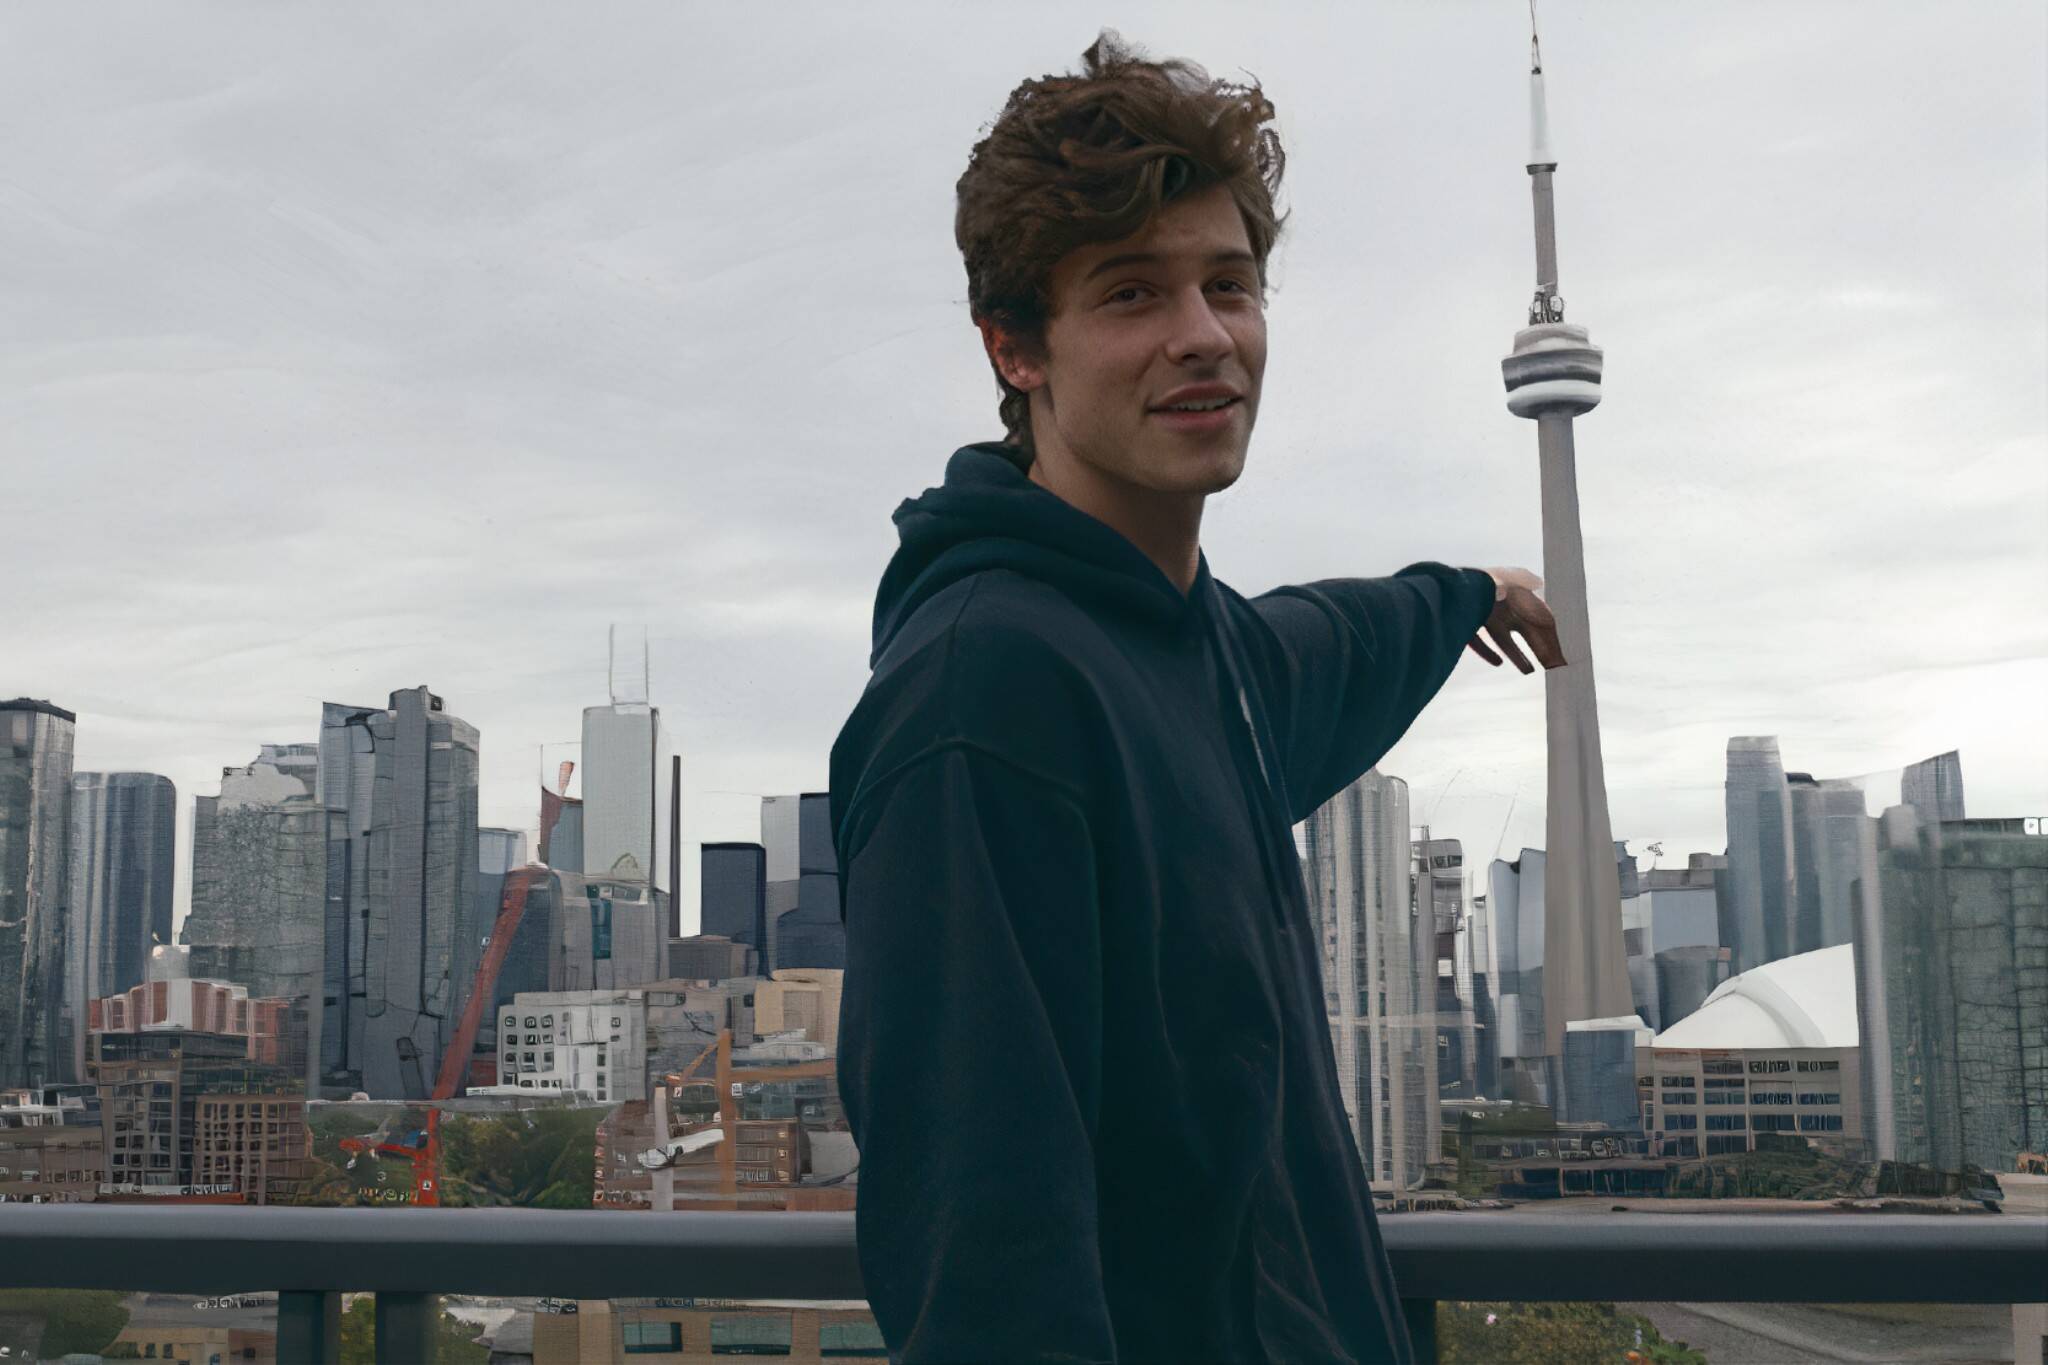 Shawn Mendes Netflix 2020 Wallpapers